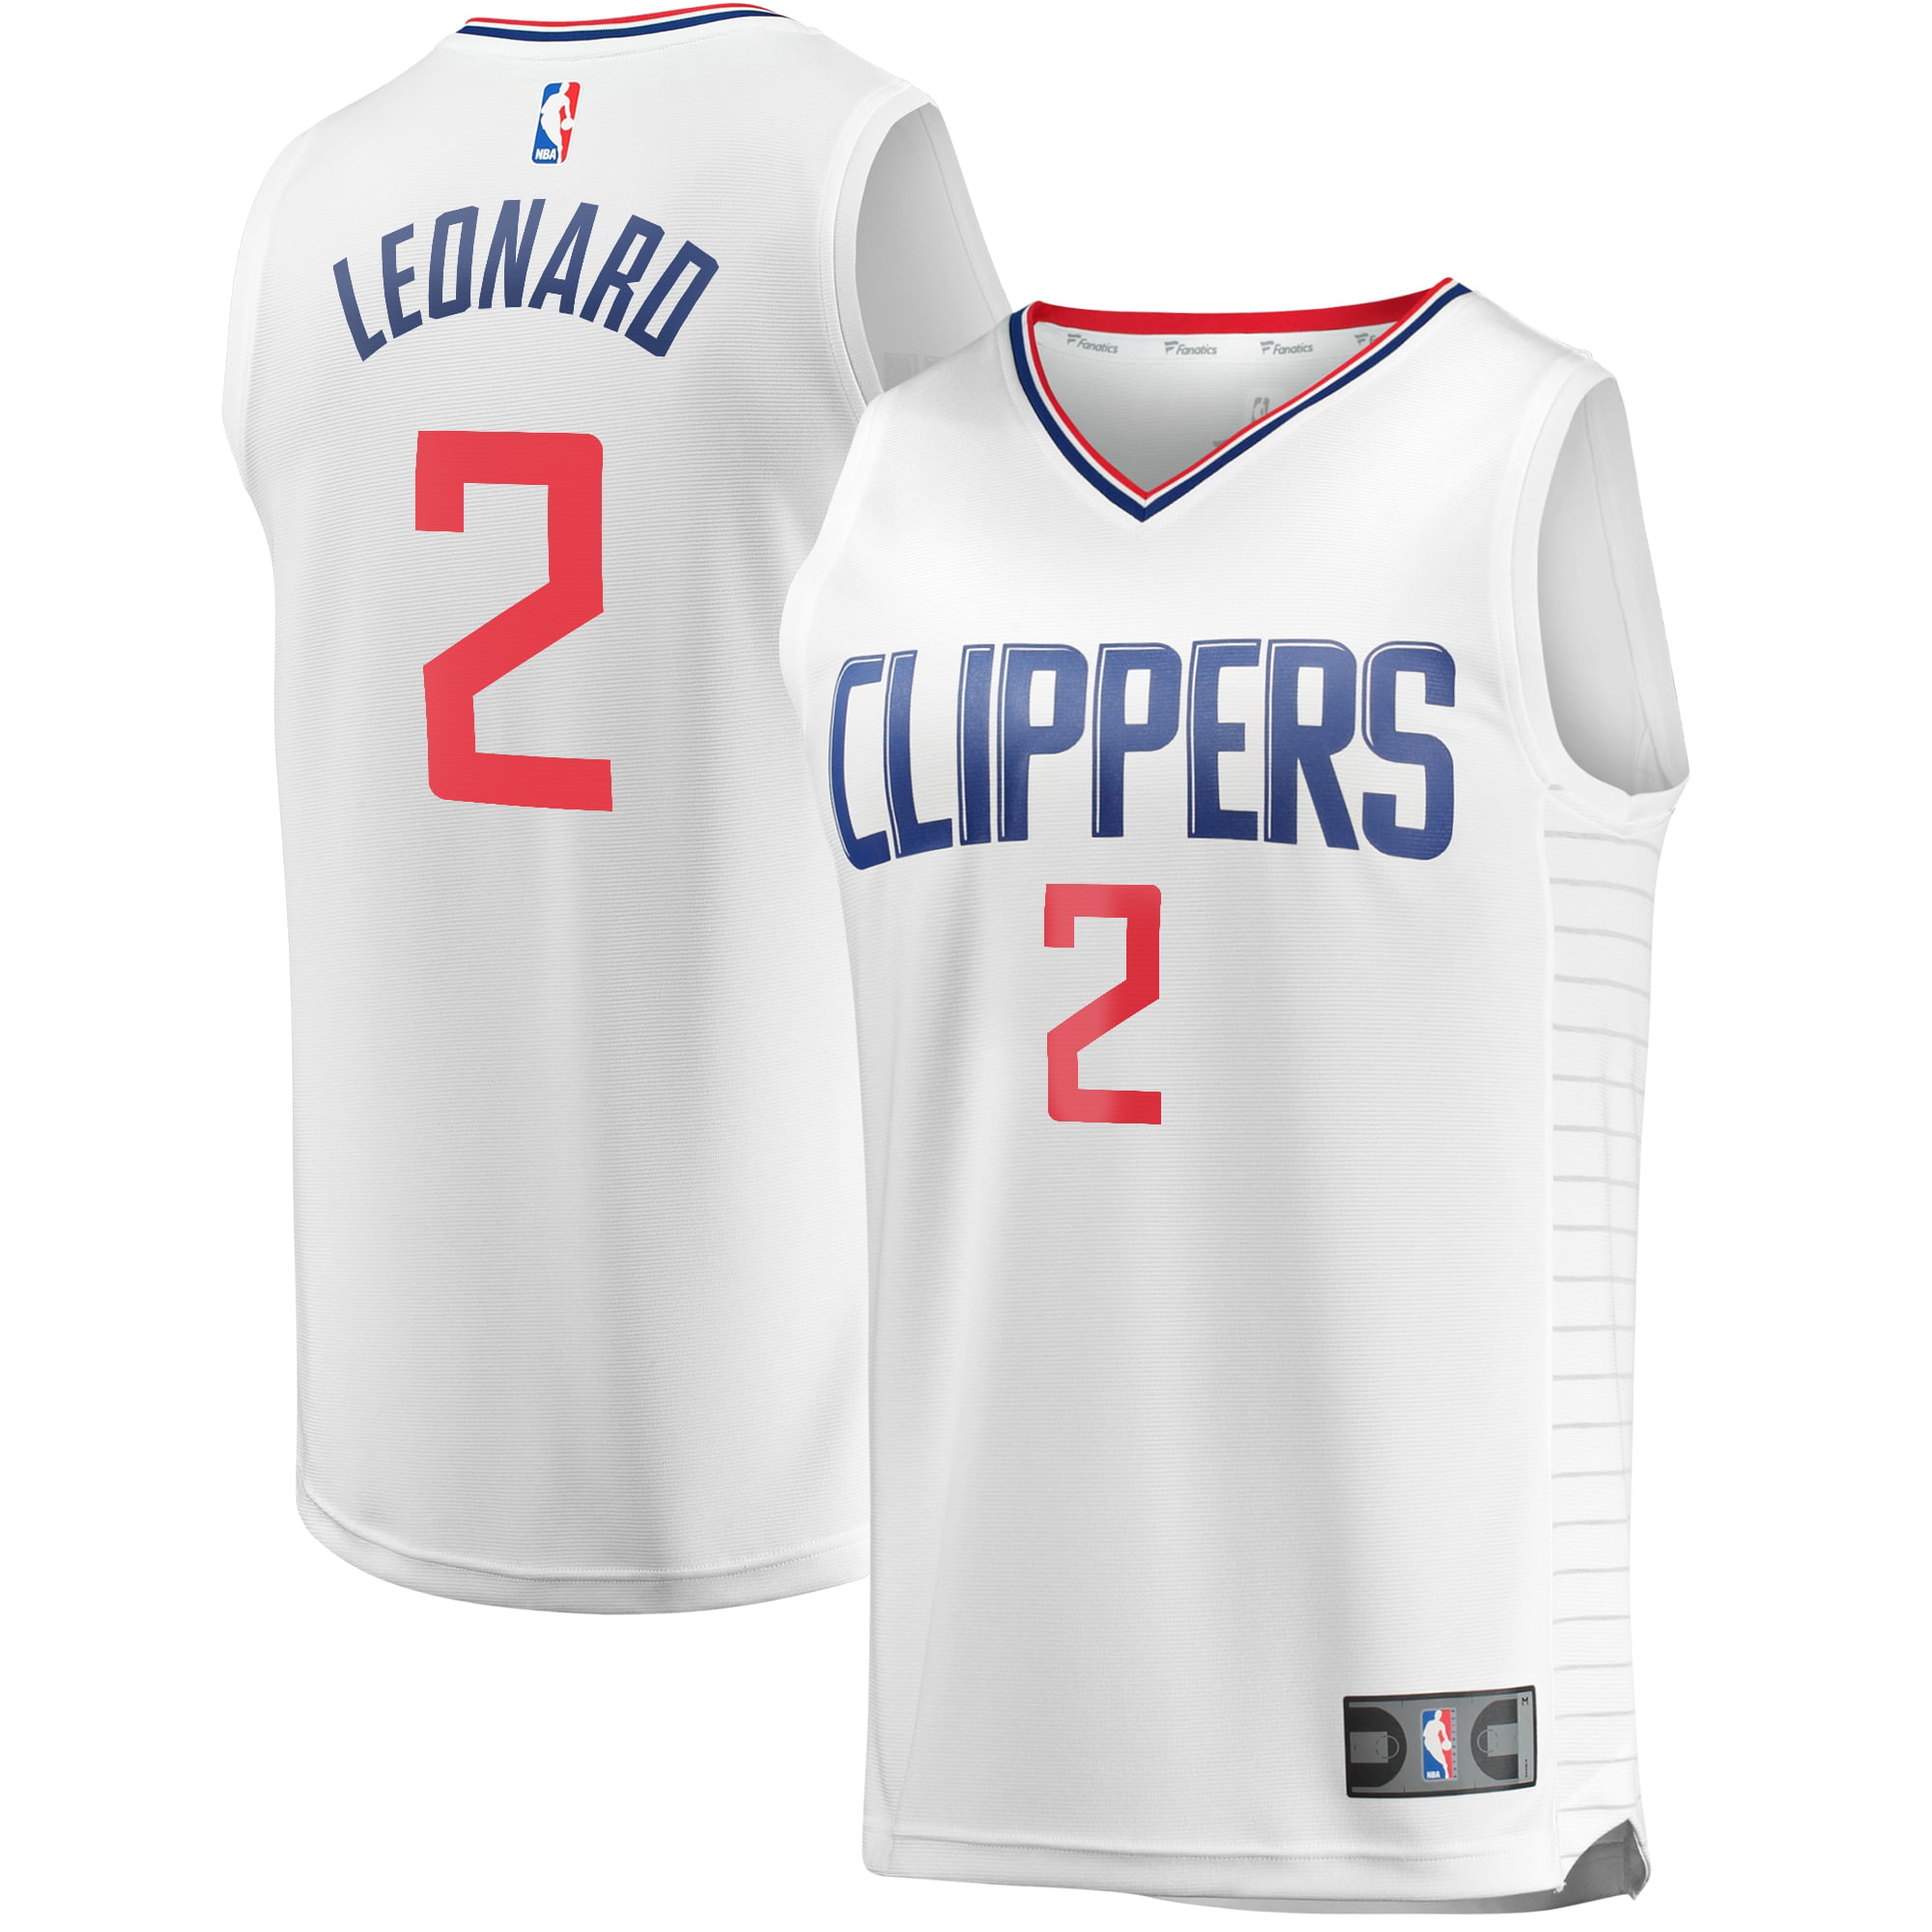 kawhi jersey clippers